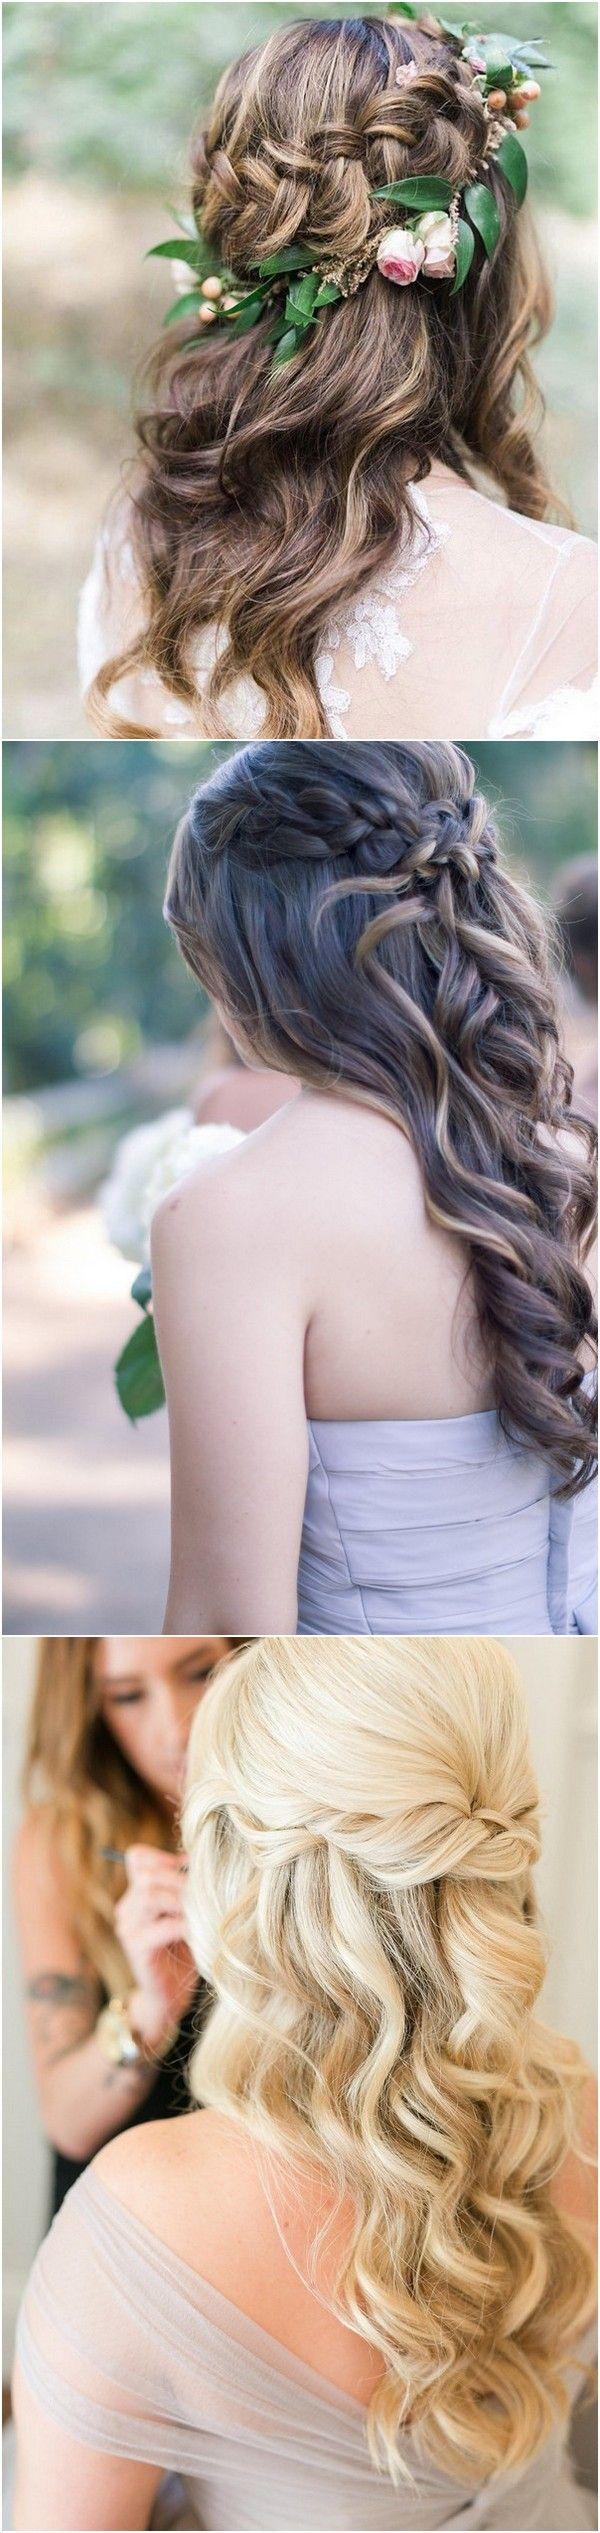 Mariage - 10 Glamorous Half Up Half Down Wedding Hairstyles From Hair And Makeup Girl